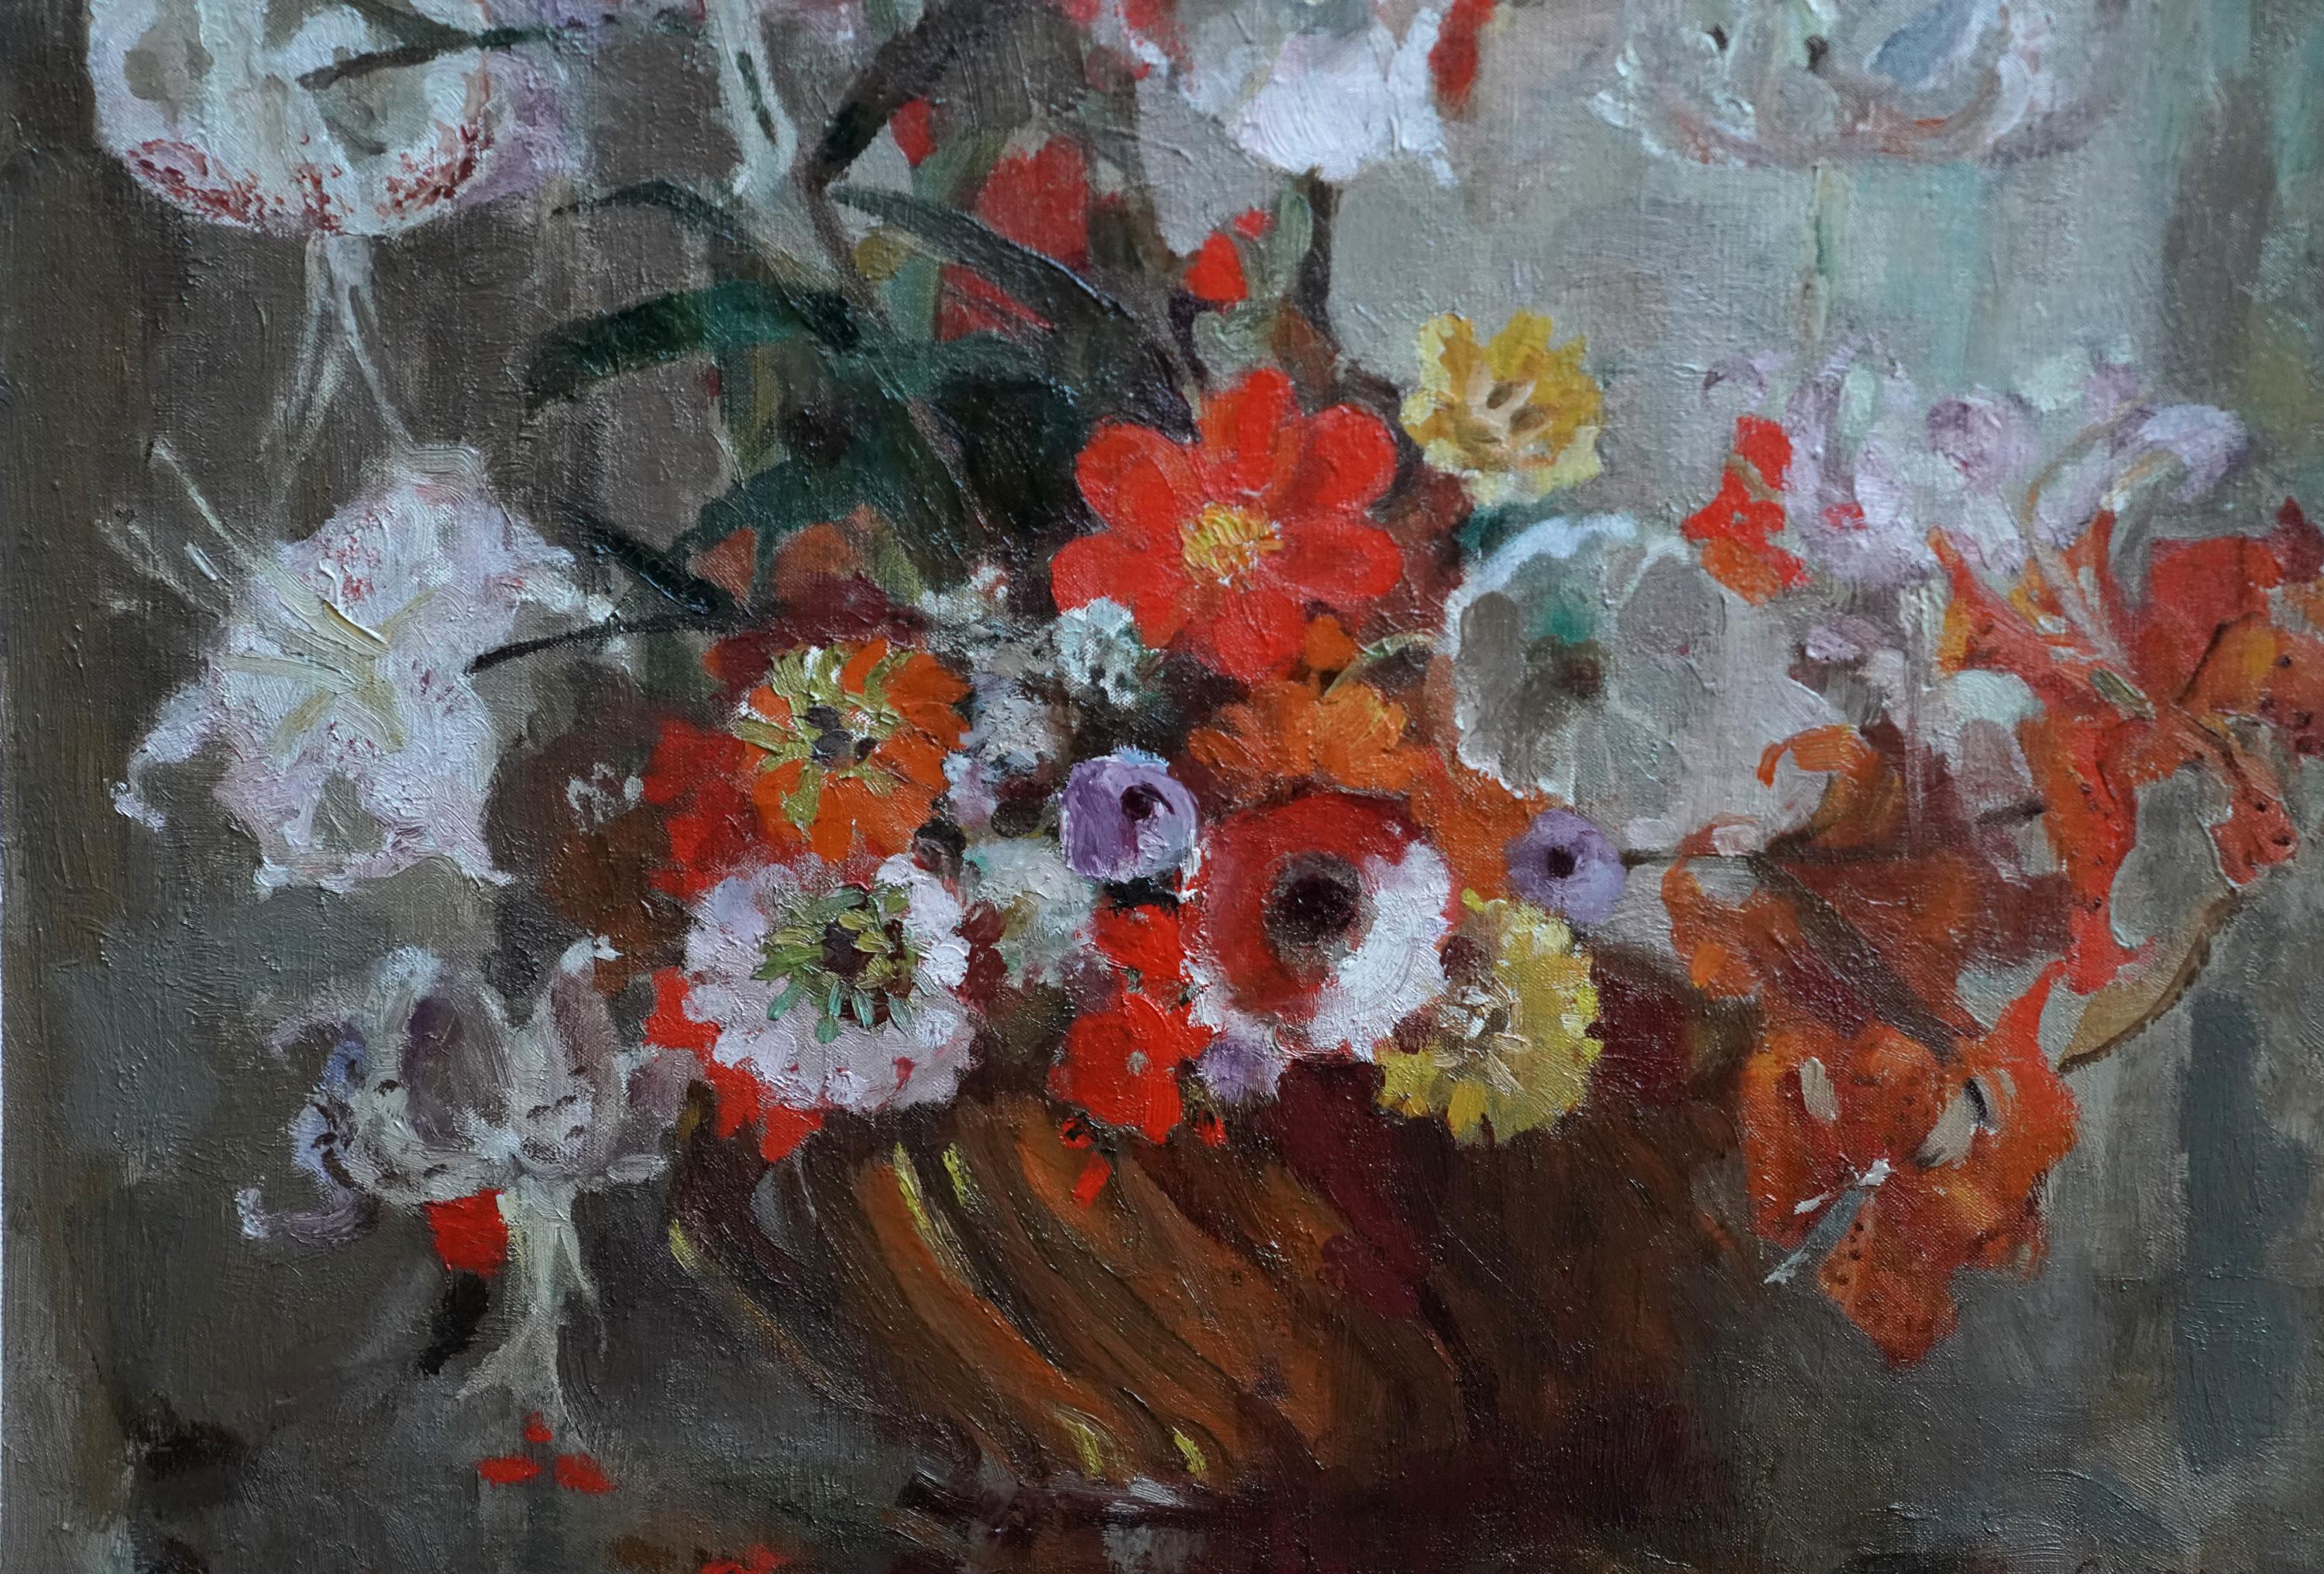 White and Orange Flowers in a Bowl - British Impressionist floral oil painting - Post-Impressionist Painting by Theresa Norah Copnall